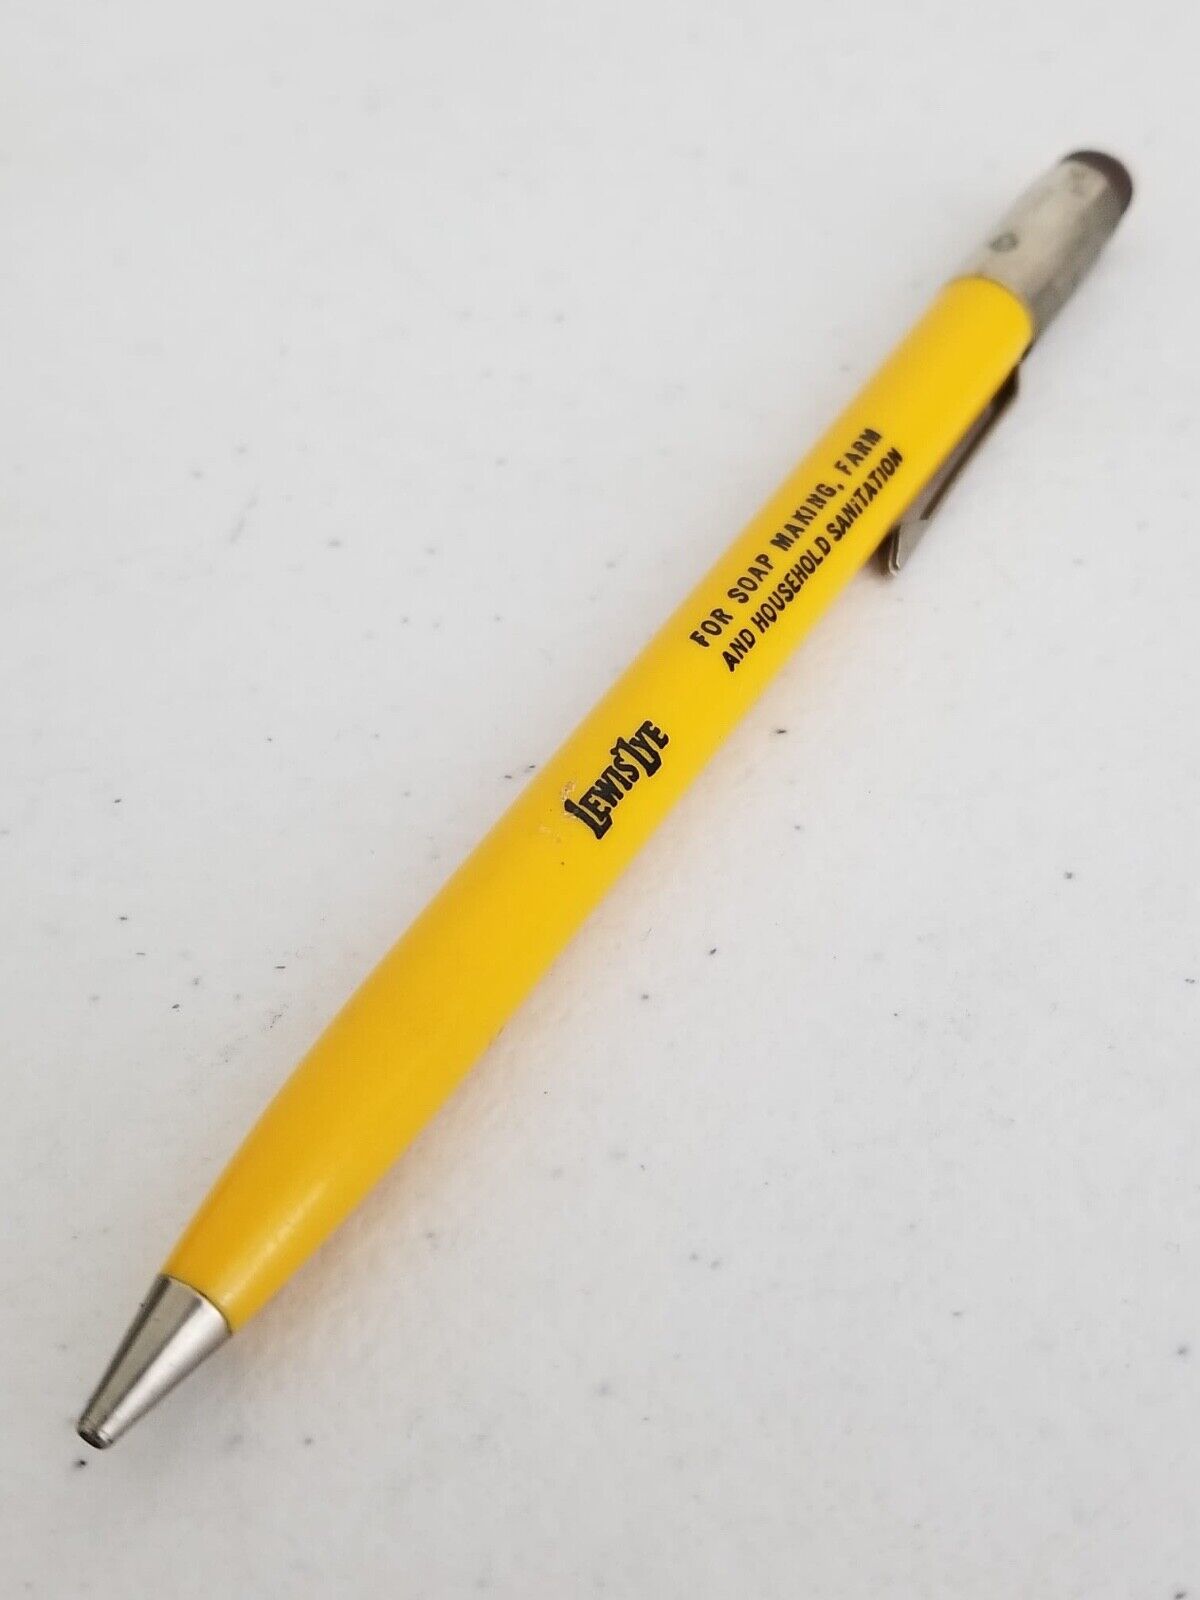 Rare Vintage Yellow Scripto Mechanical Pencil - Atlanta USA Promotional Collectible for Lewis Lye and Knox-Out DDT Insecticides - TreasuTiques